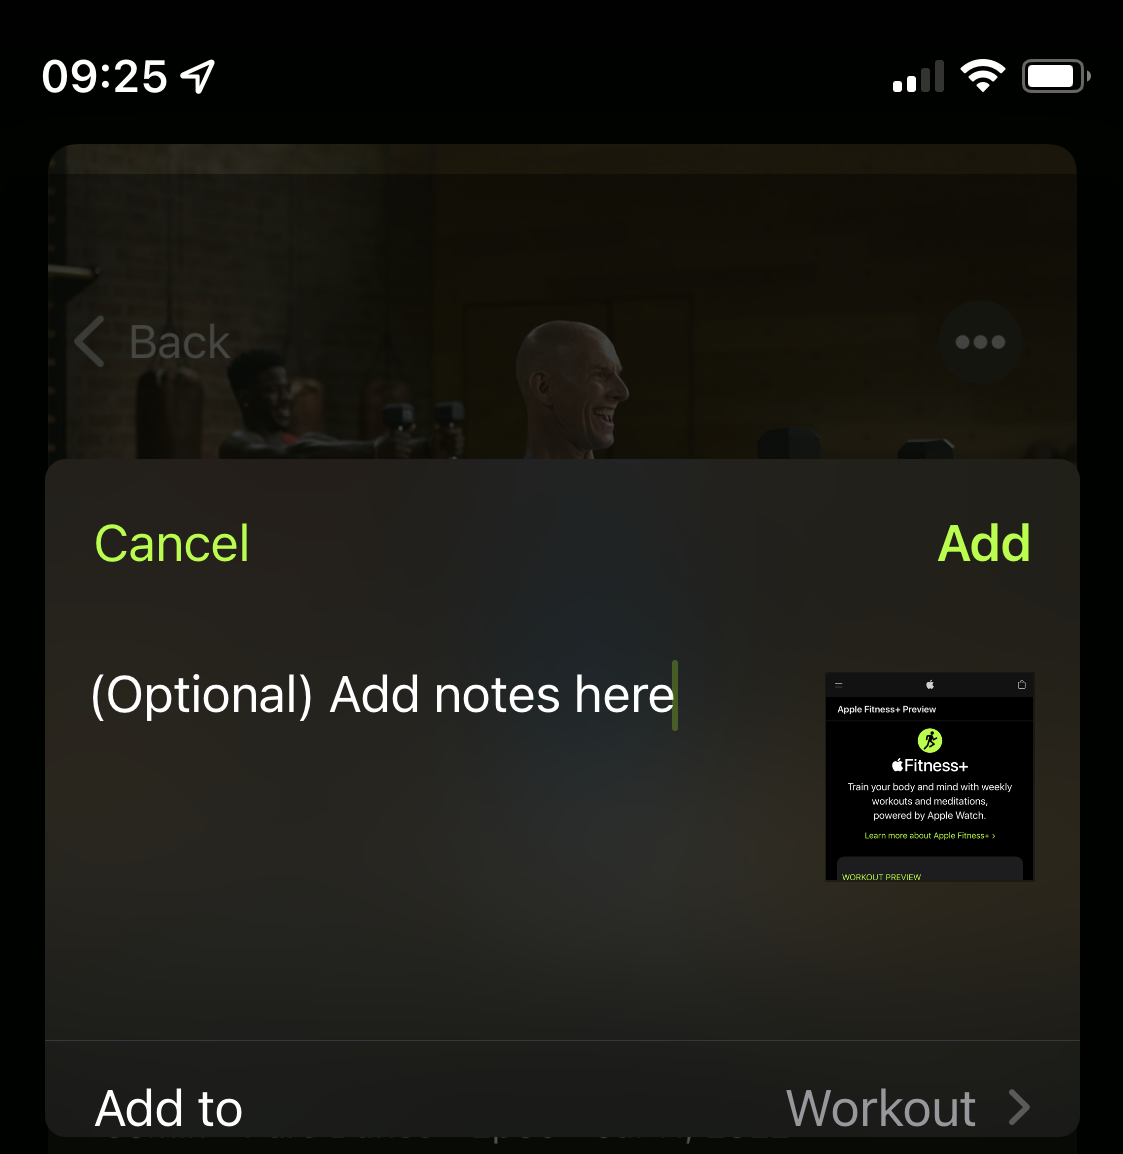 Add in any optional notes